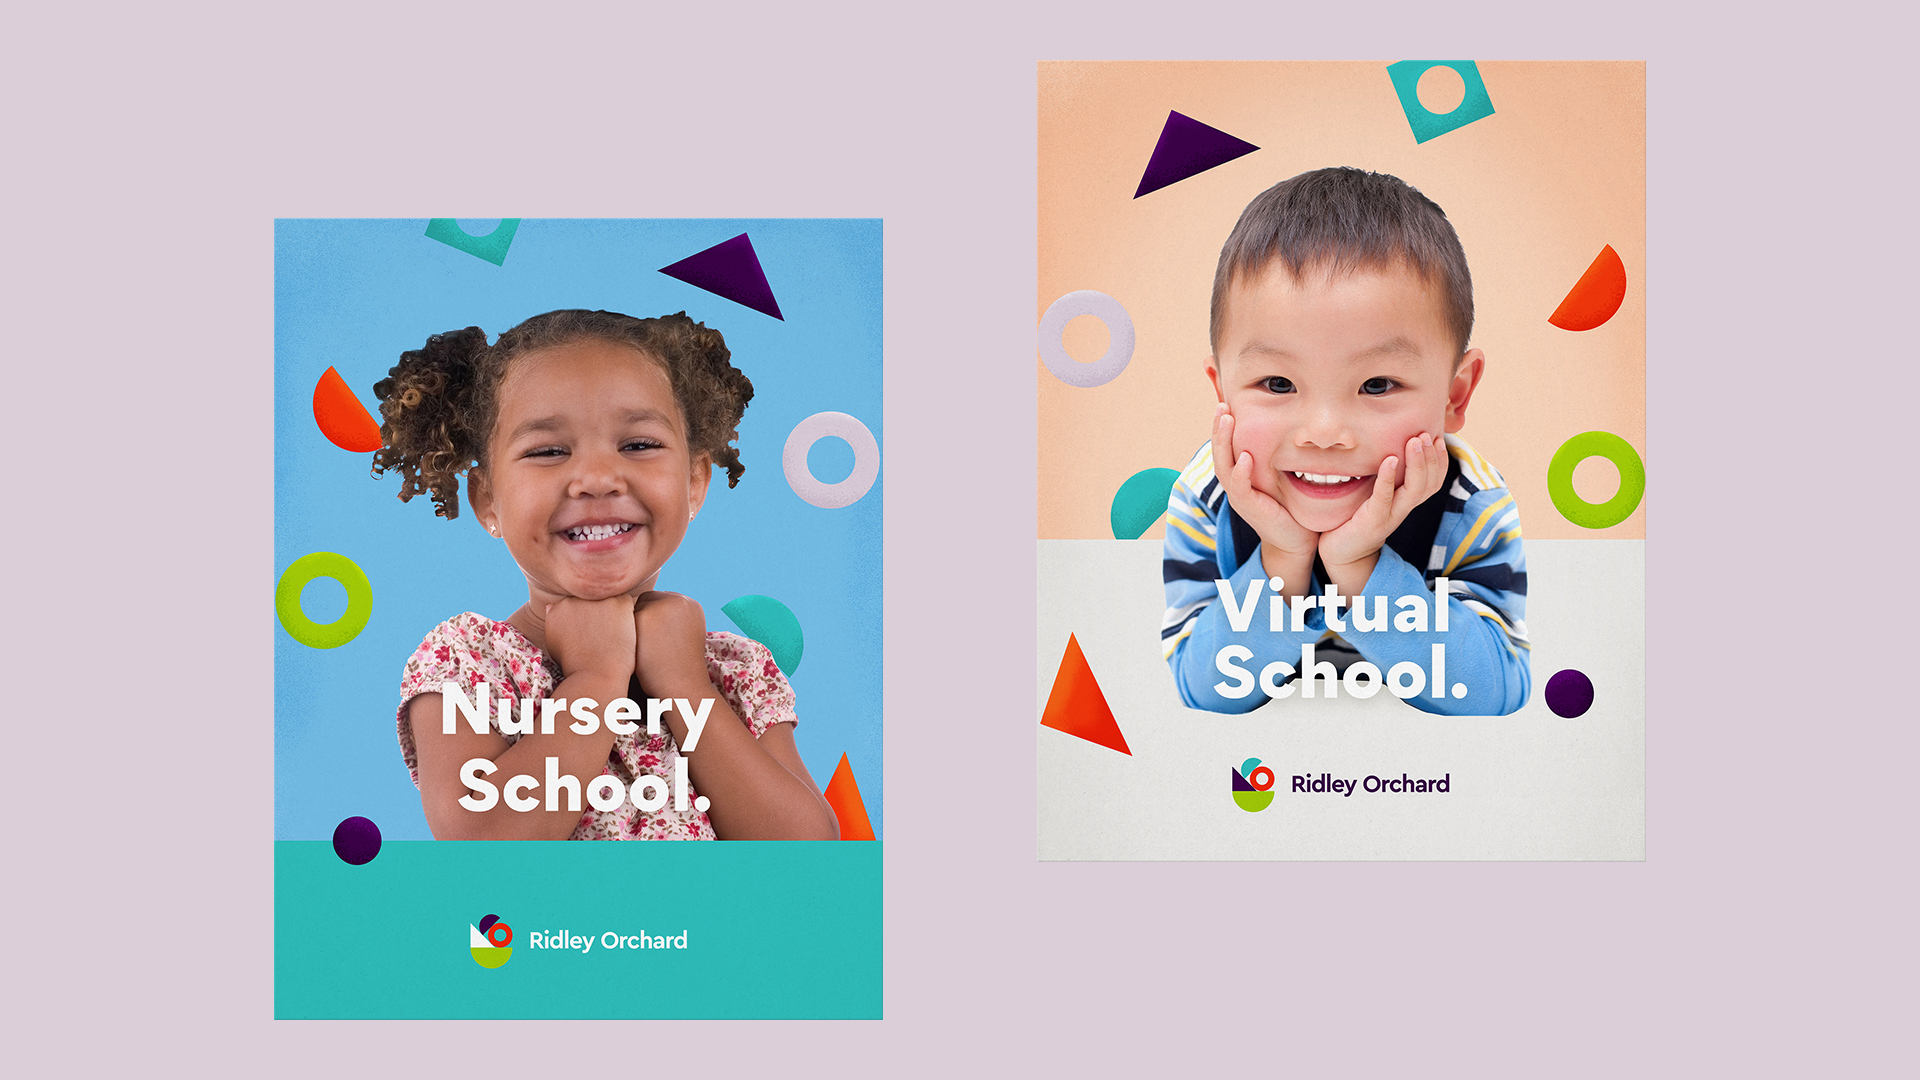 Ridley Orchard Child Care Center Brand Case Study